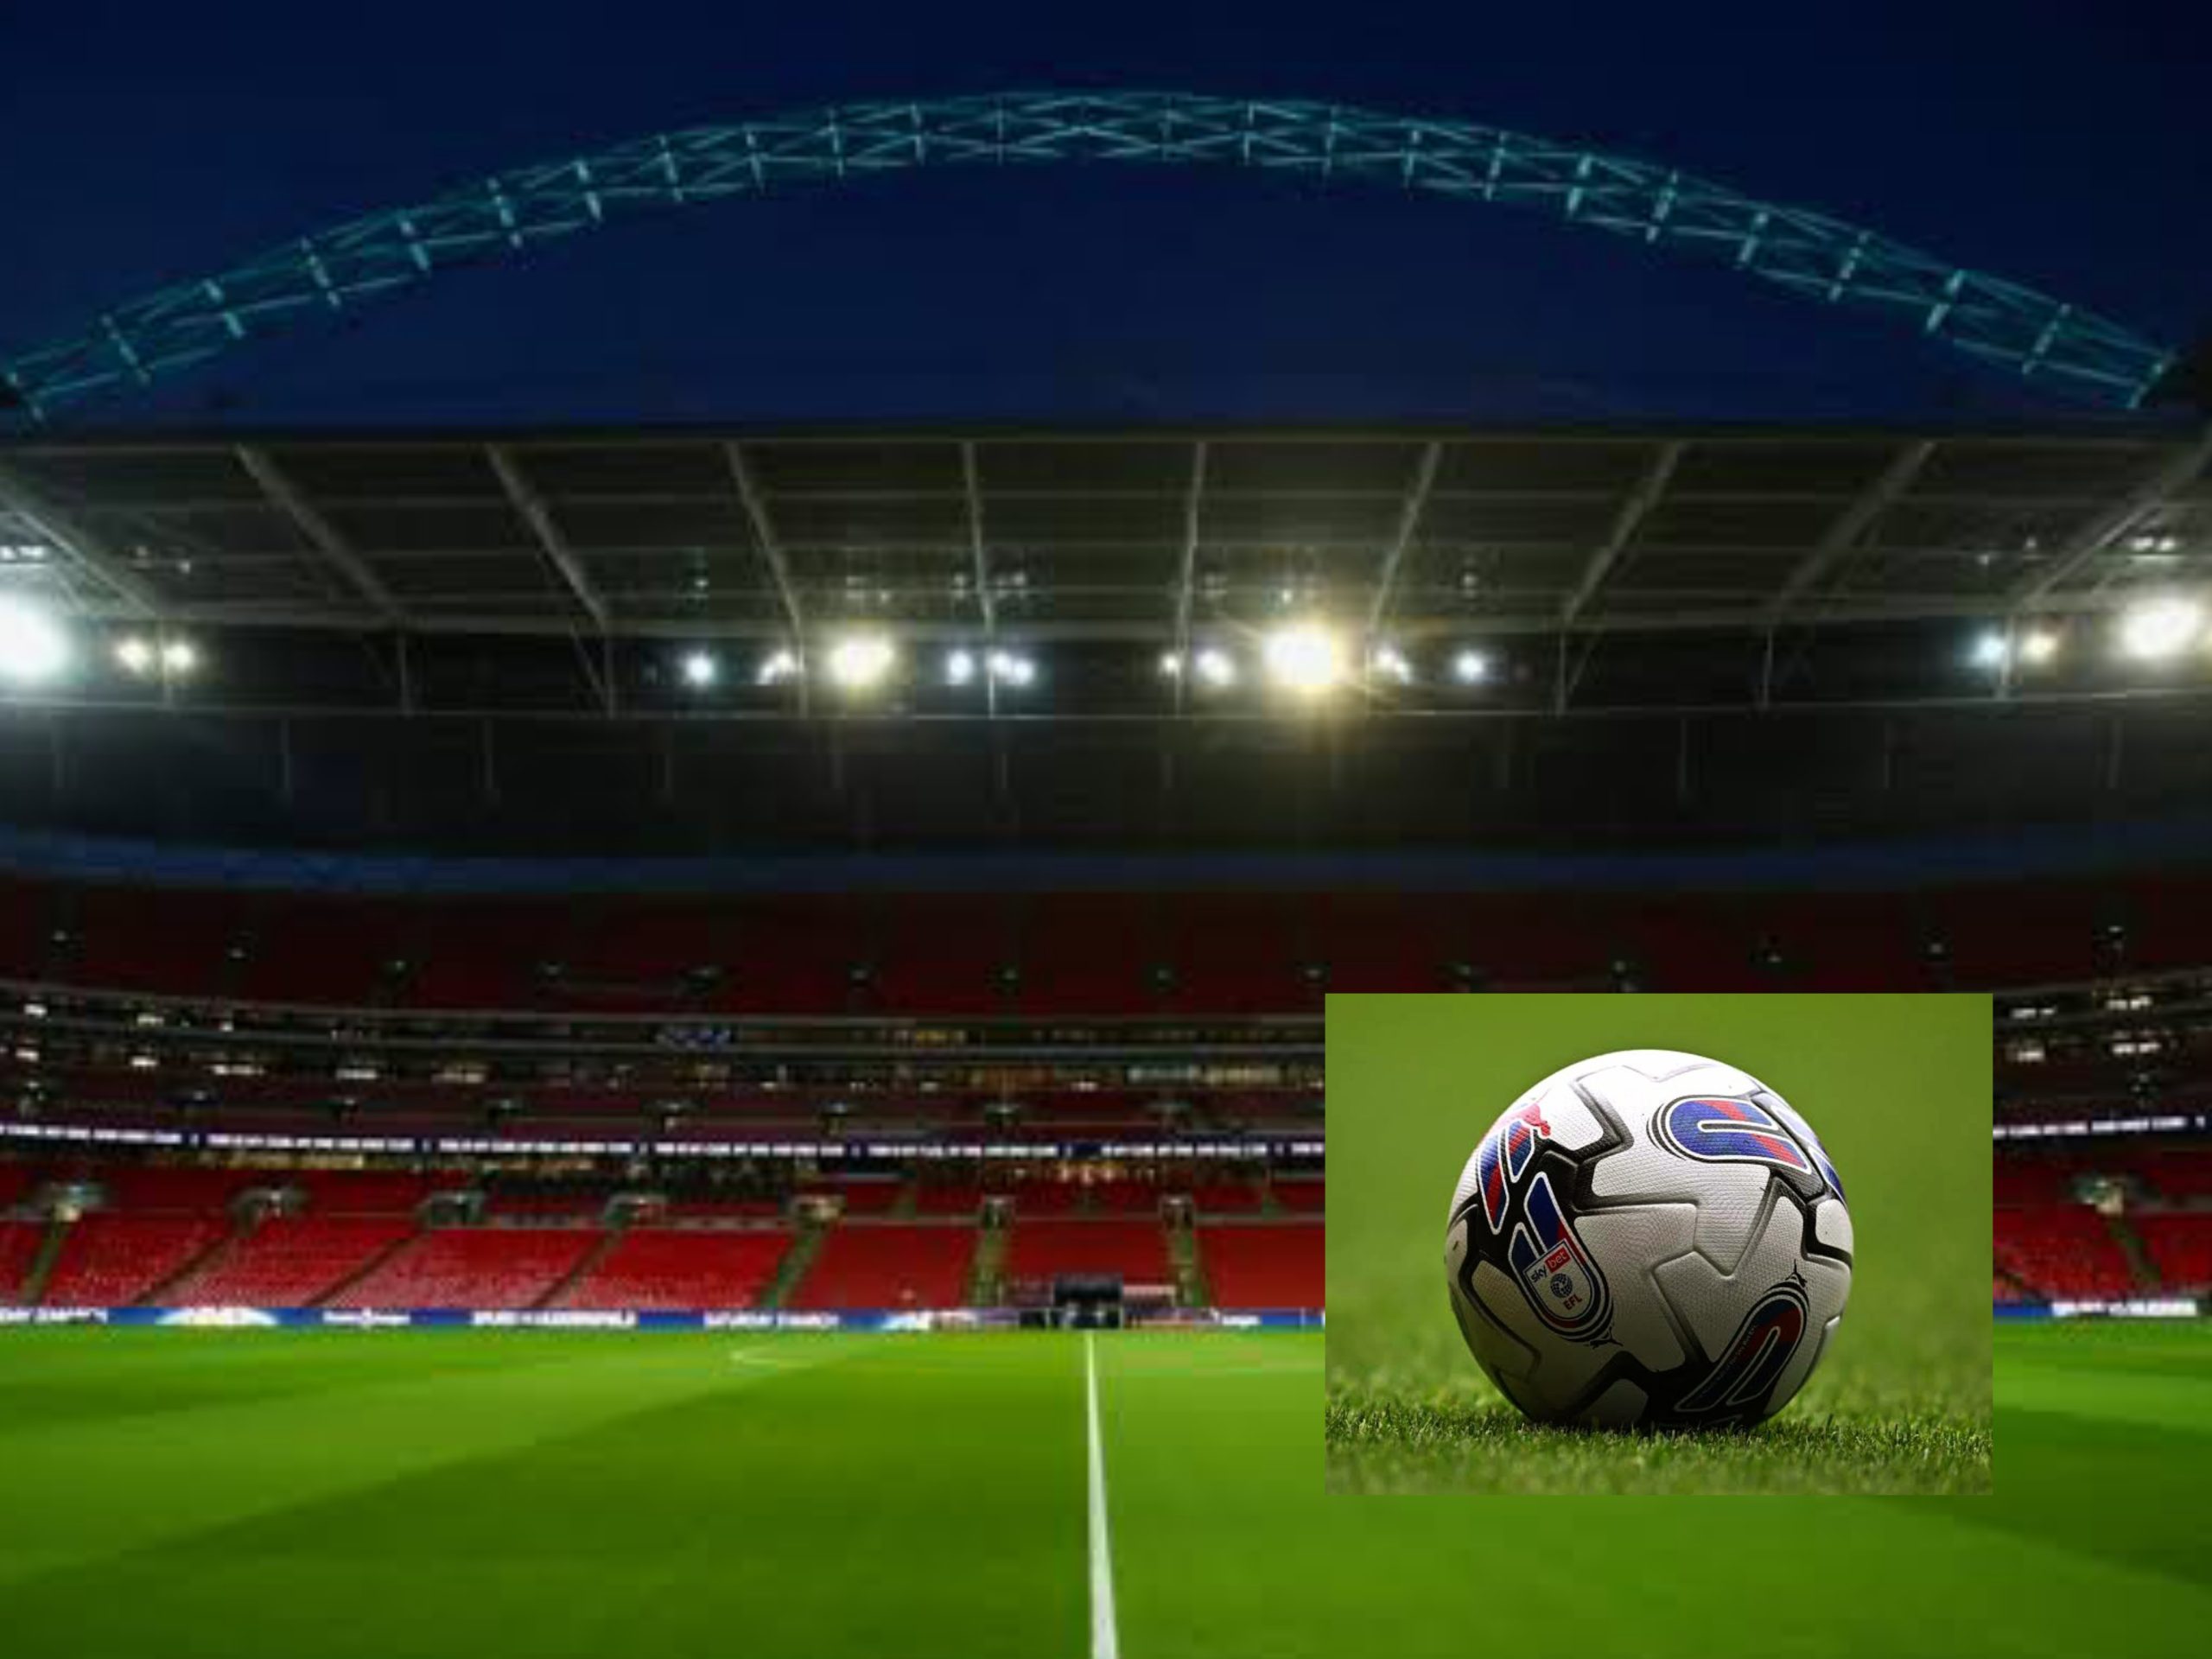 A picture combination of Premier League football field and a picture of a football 